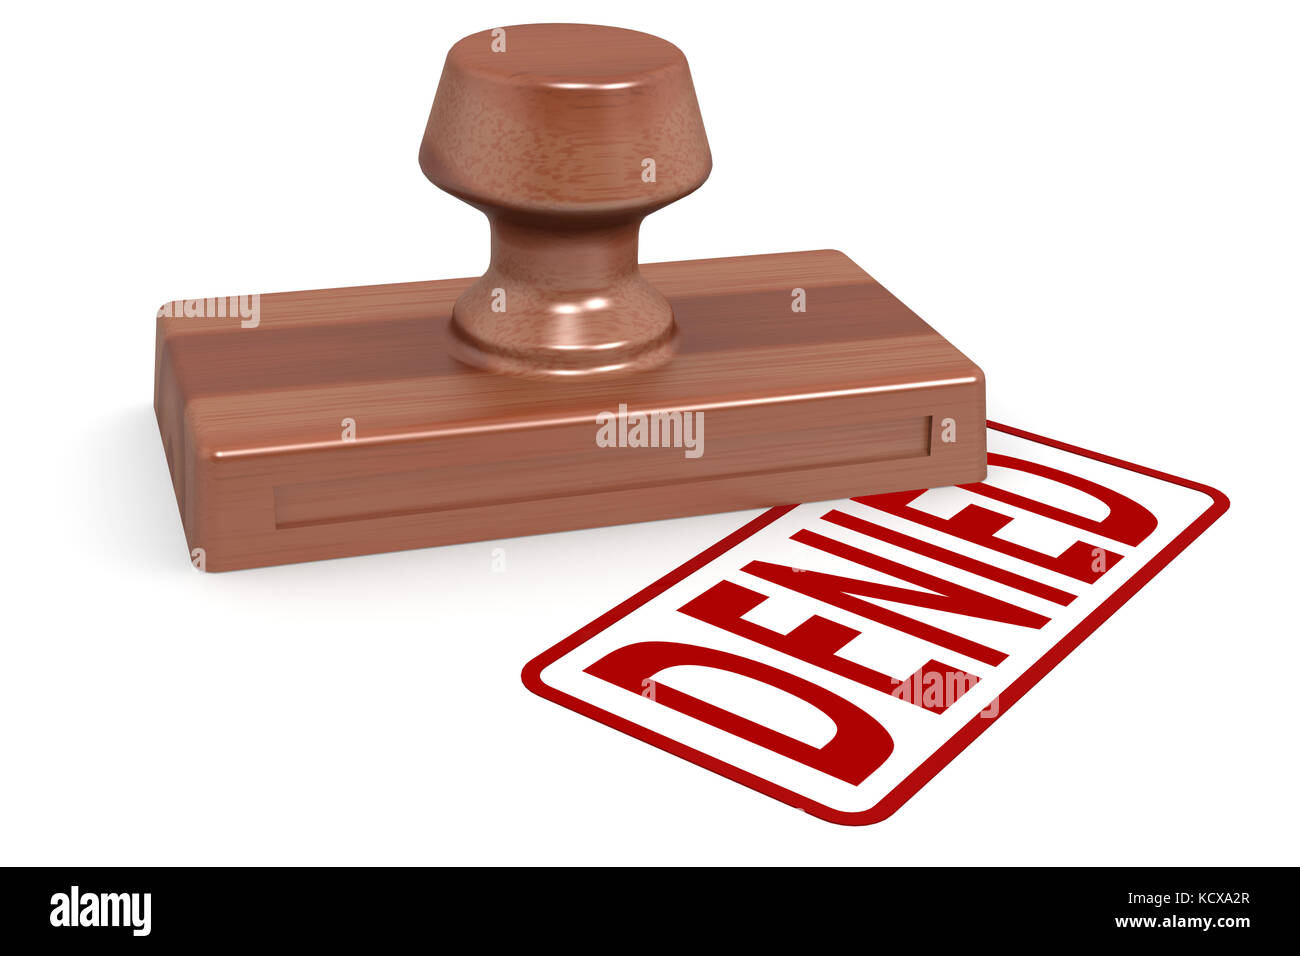 Wooden stamp denied with red text image with hi-res rendered artwork that could be used for any graphic design. Stock Photo